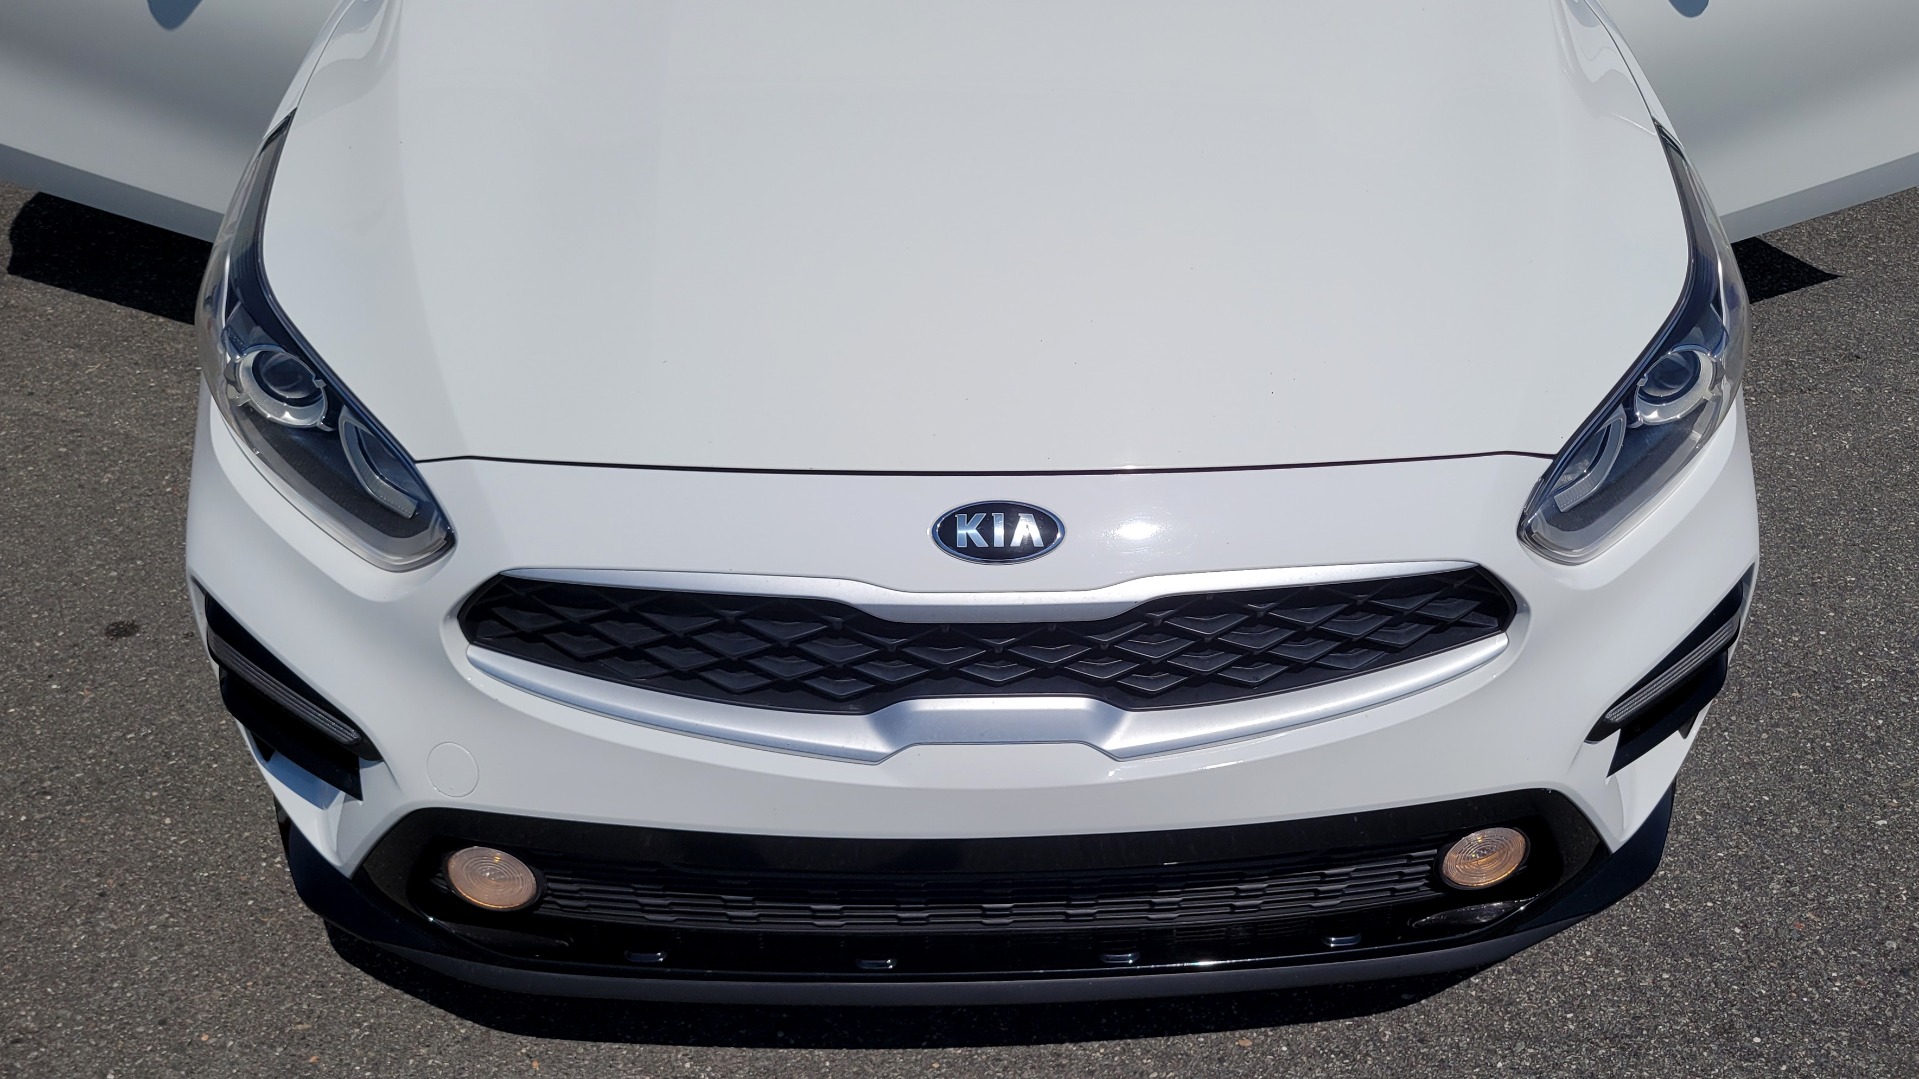 Used 2019 Kia FORTE LXS IVT 2.0L SEDAN / CVT TRANS / APPLE / DUAL-ZONE AIR / REARVIEW for sale $16,995 at Formula Imports in Charlotte NC 28227 23